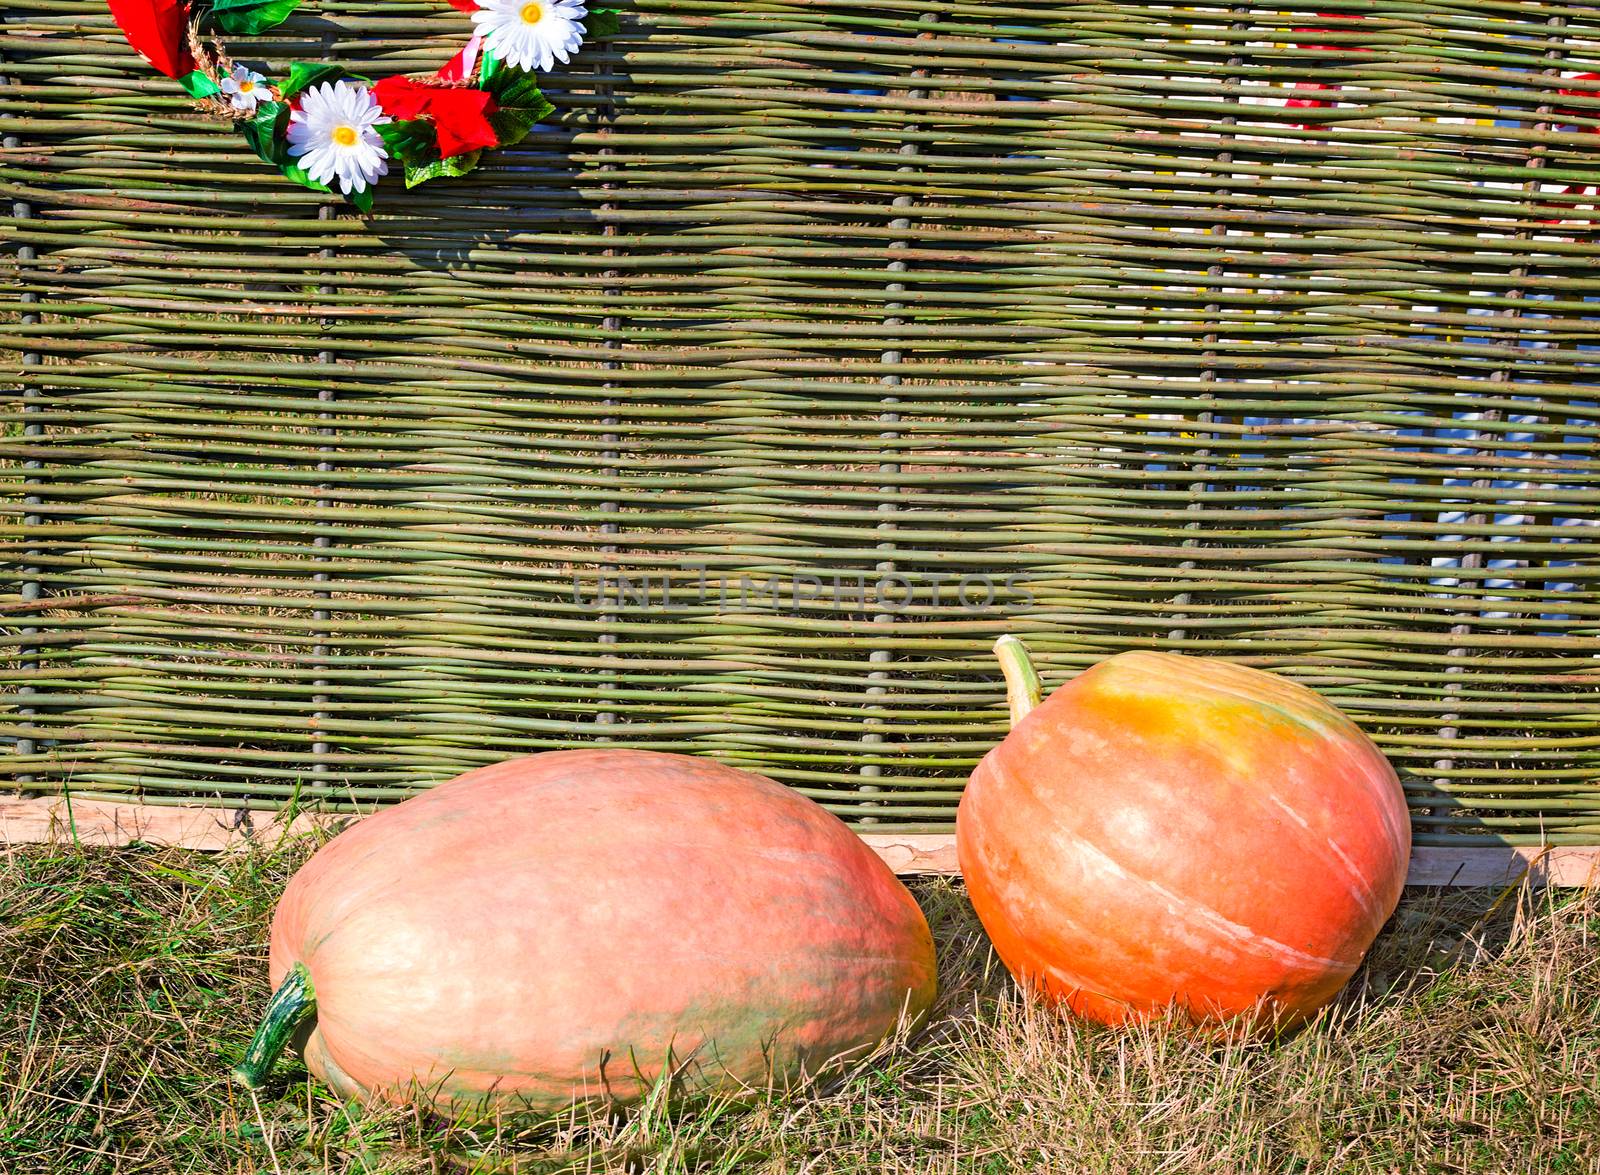 At the wattled rural fence decorated with a wreath, two big ripe pumpkins lie.